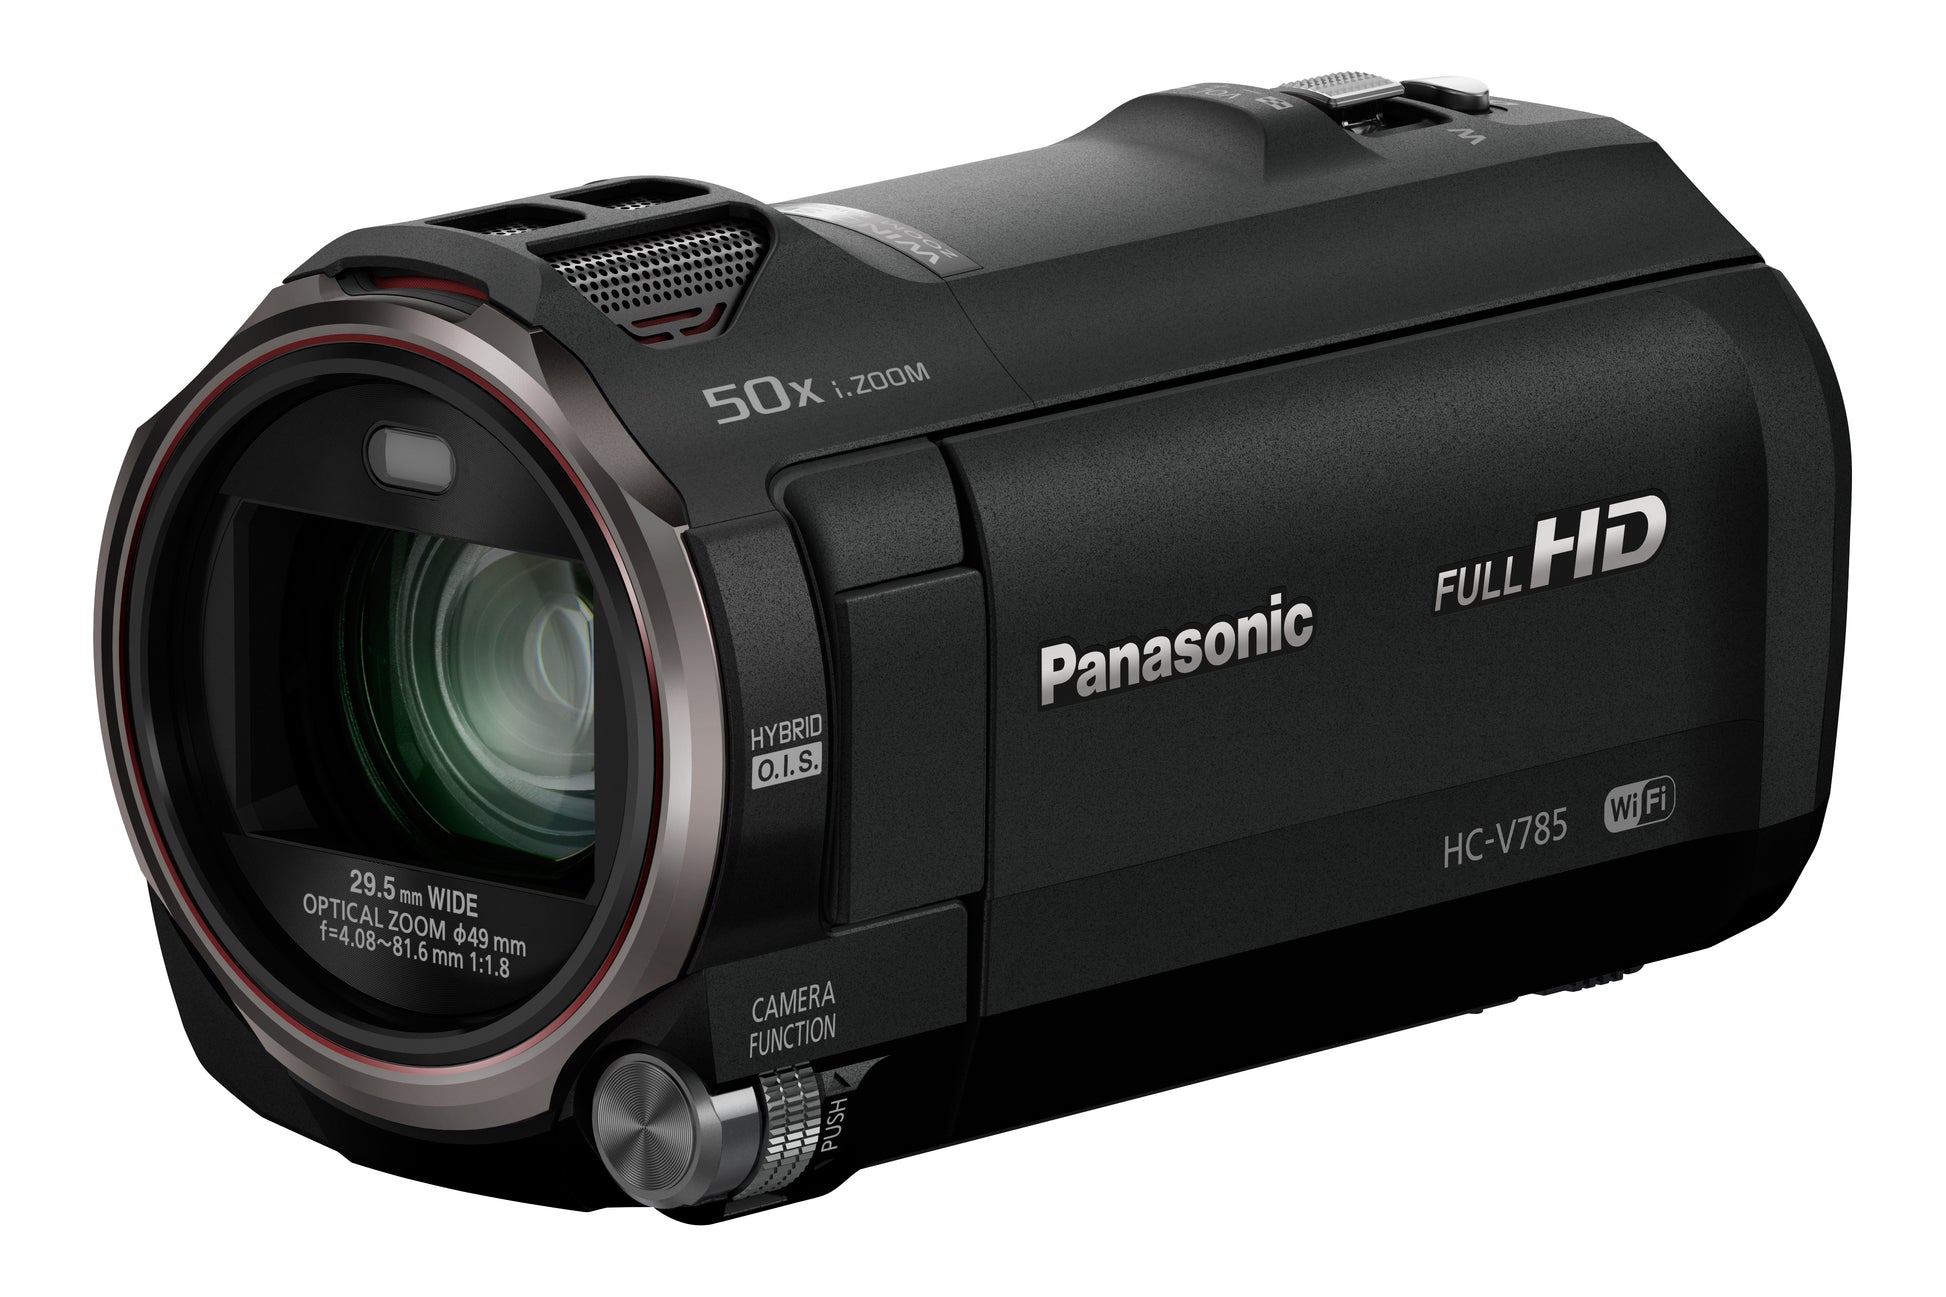 Panasonic HC-V785 Full HD Camcorder with 20x Optical Zoom, 3" LCD, WiFi & SD/SDHC/SDXC Compatibility - Black - maplin.co.uk